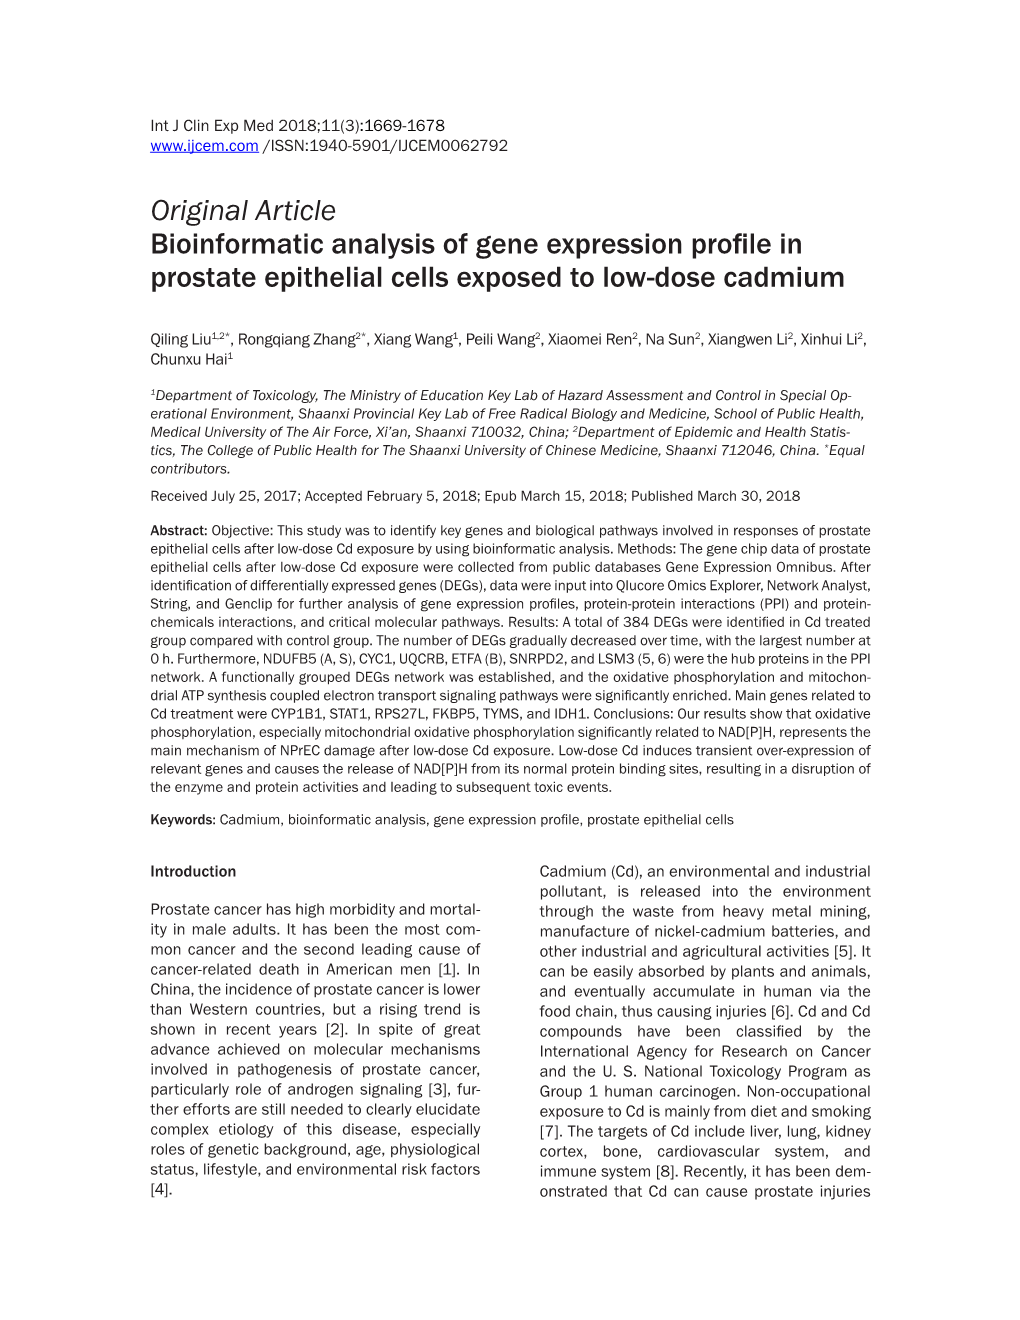 Original Article Bioinformatic Analysis of Gene Expression Profile in Prostate Epithelial Cells Exposed to Low-Dose Cadmium